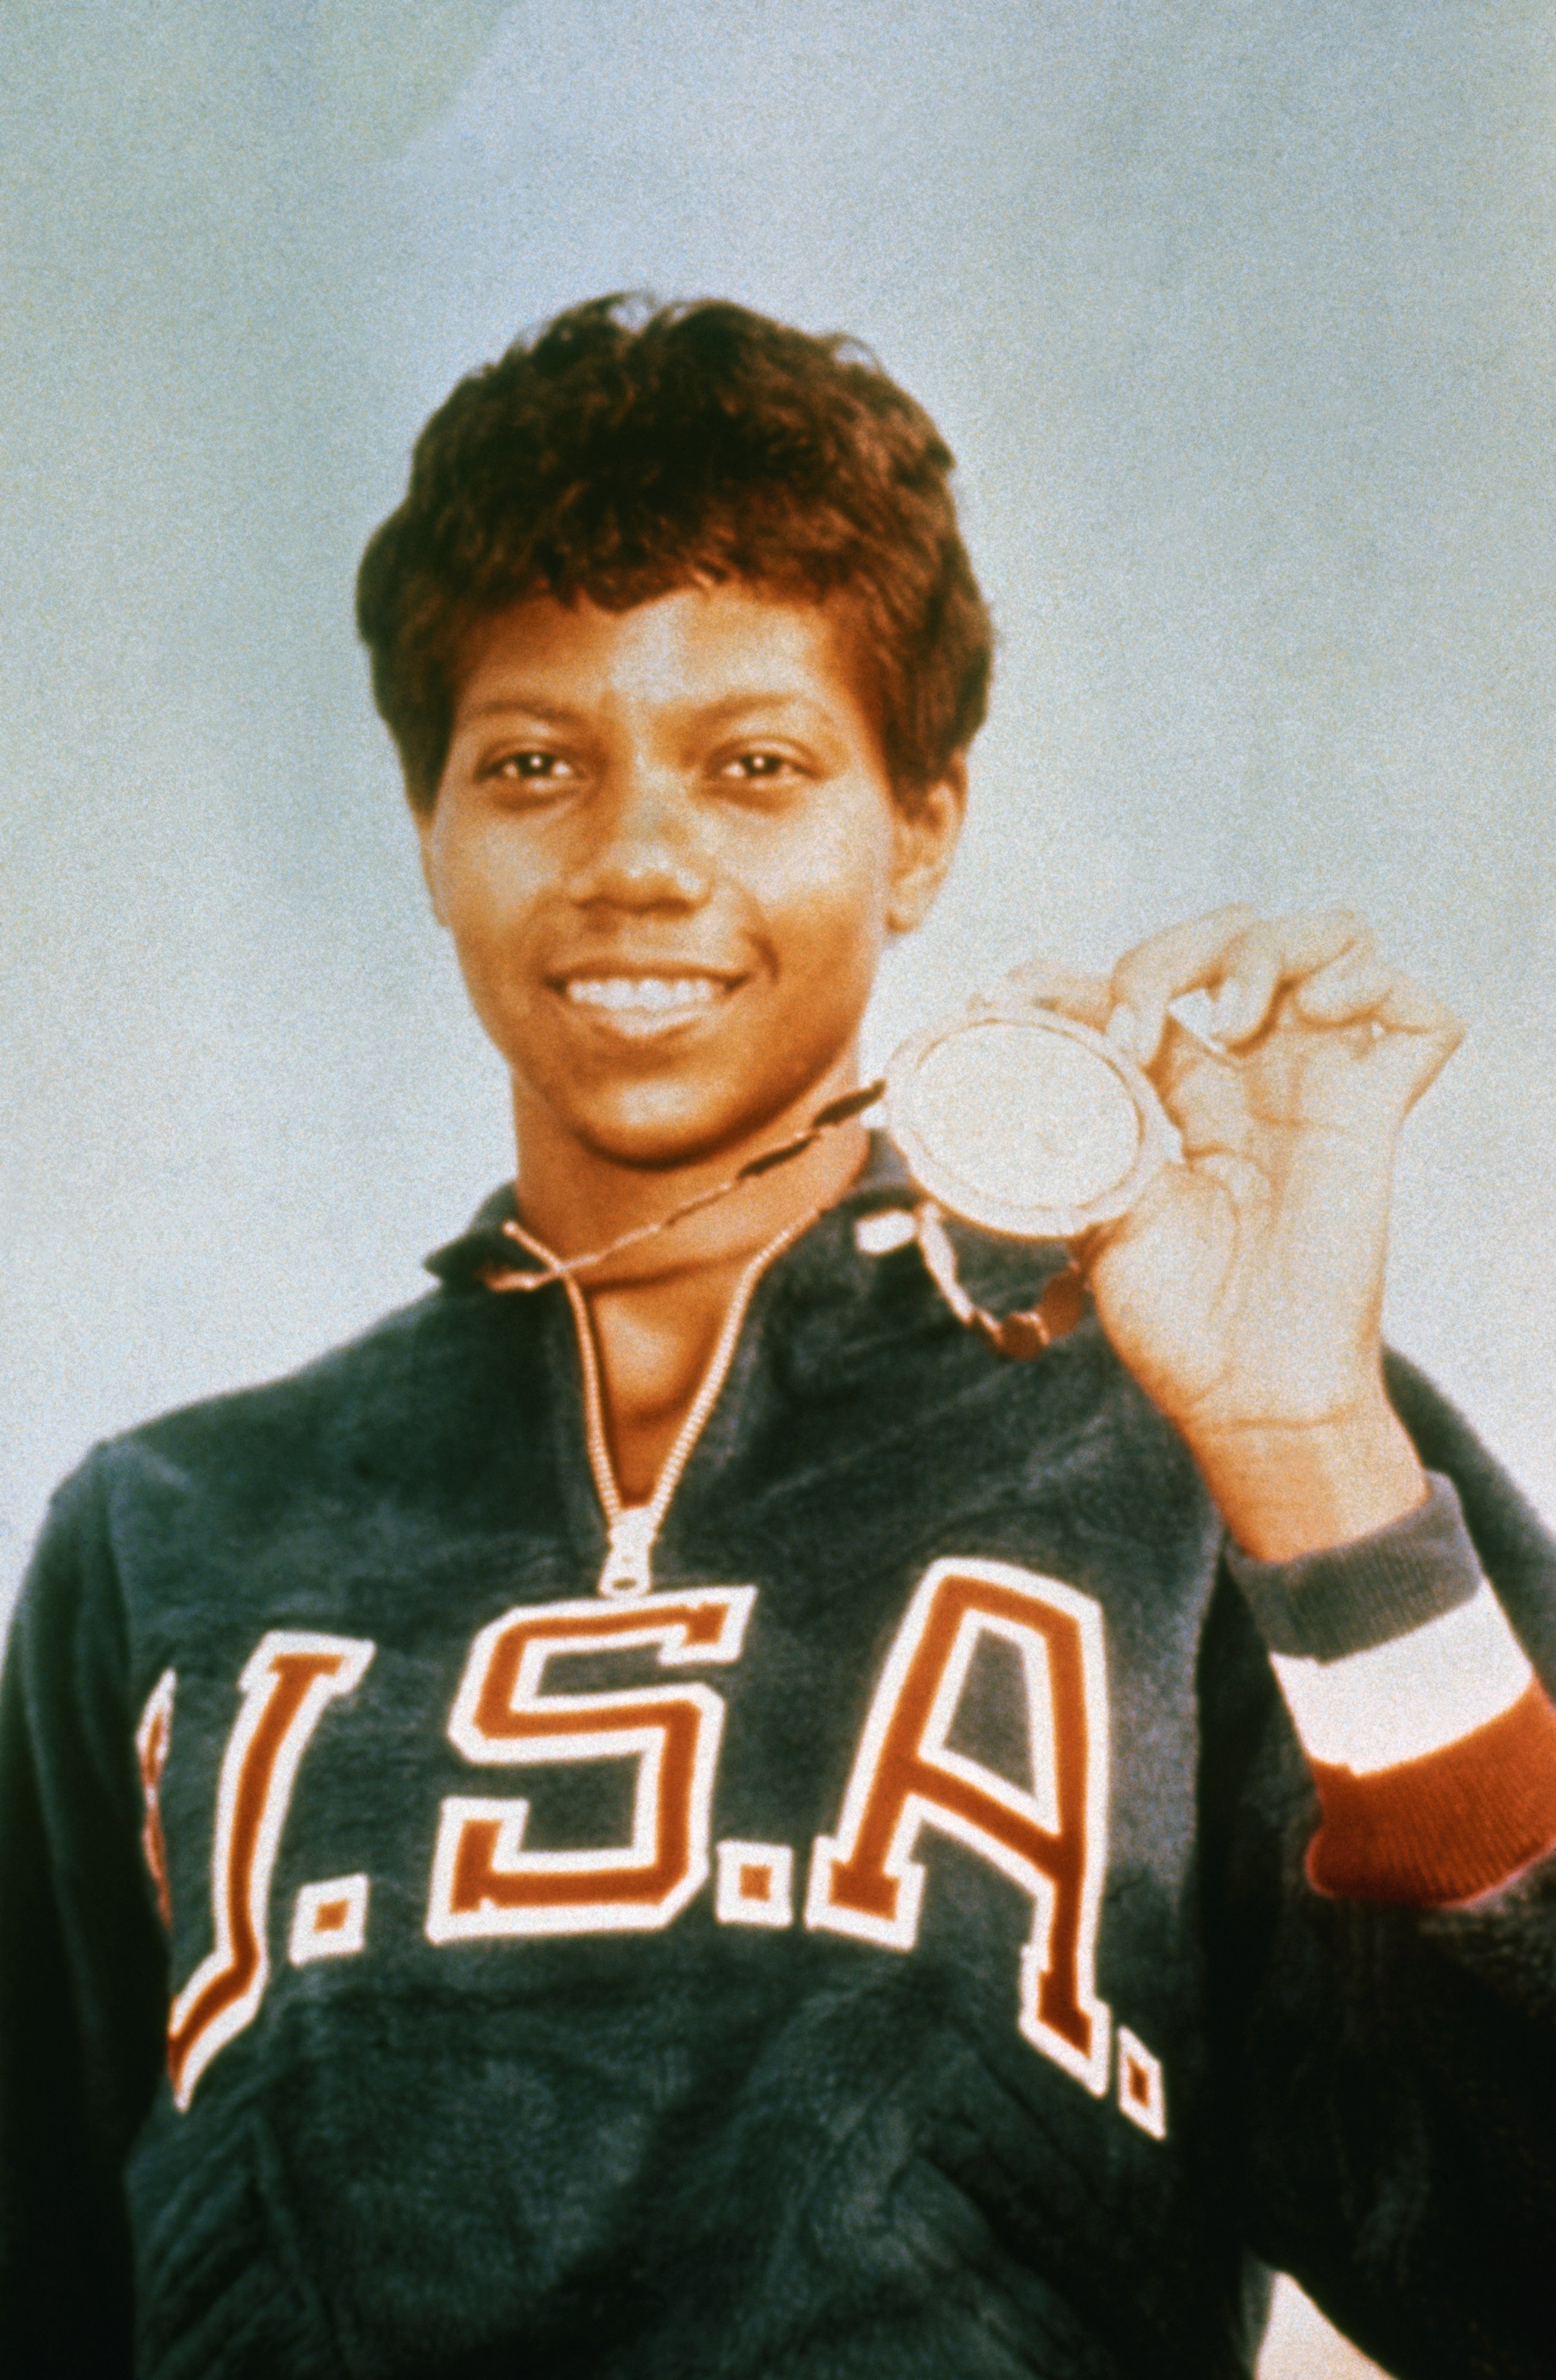 Wilma Rudolph with the gold medal she won for the 200-meter dash at the 1960 Olympics in Rome | Photo: Getty Images